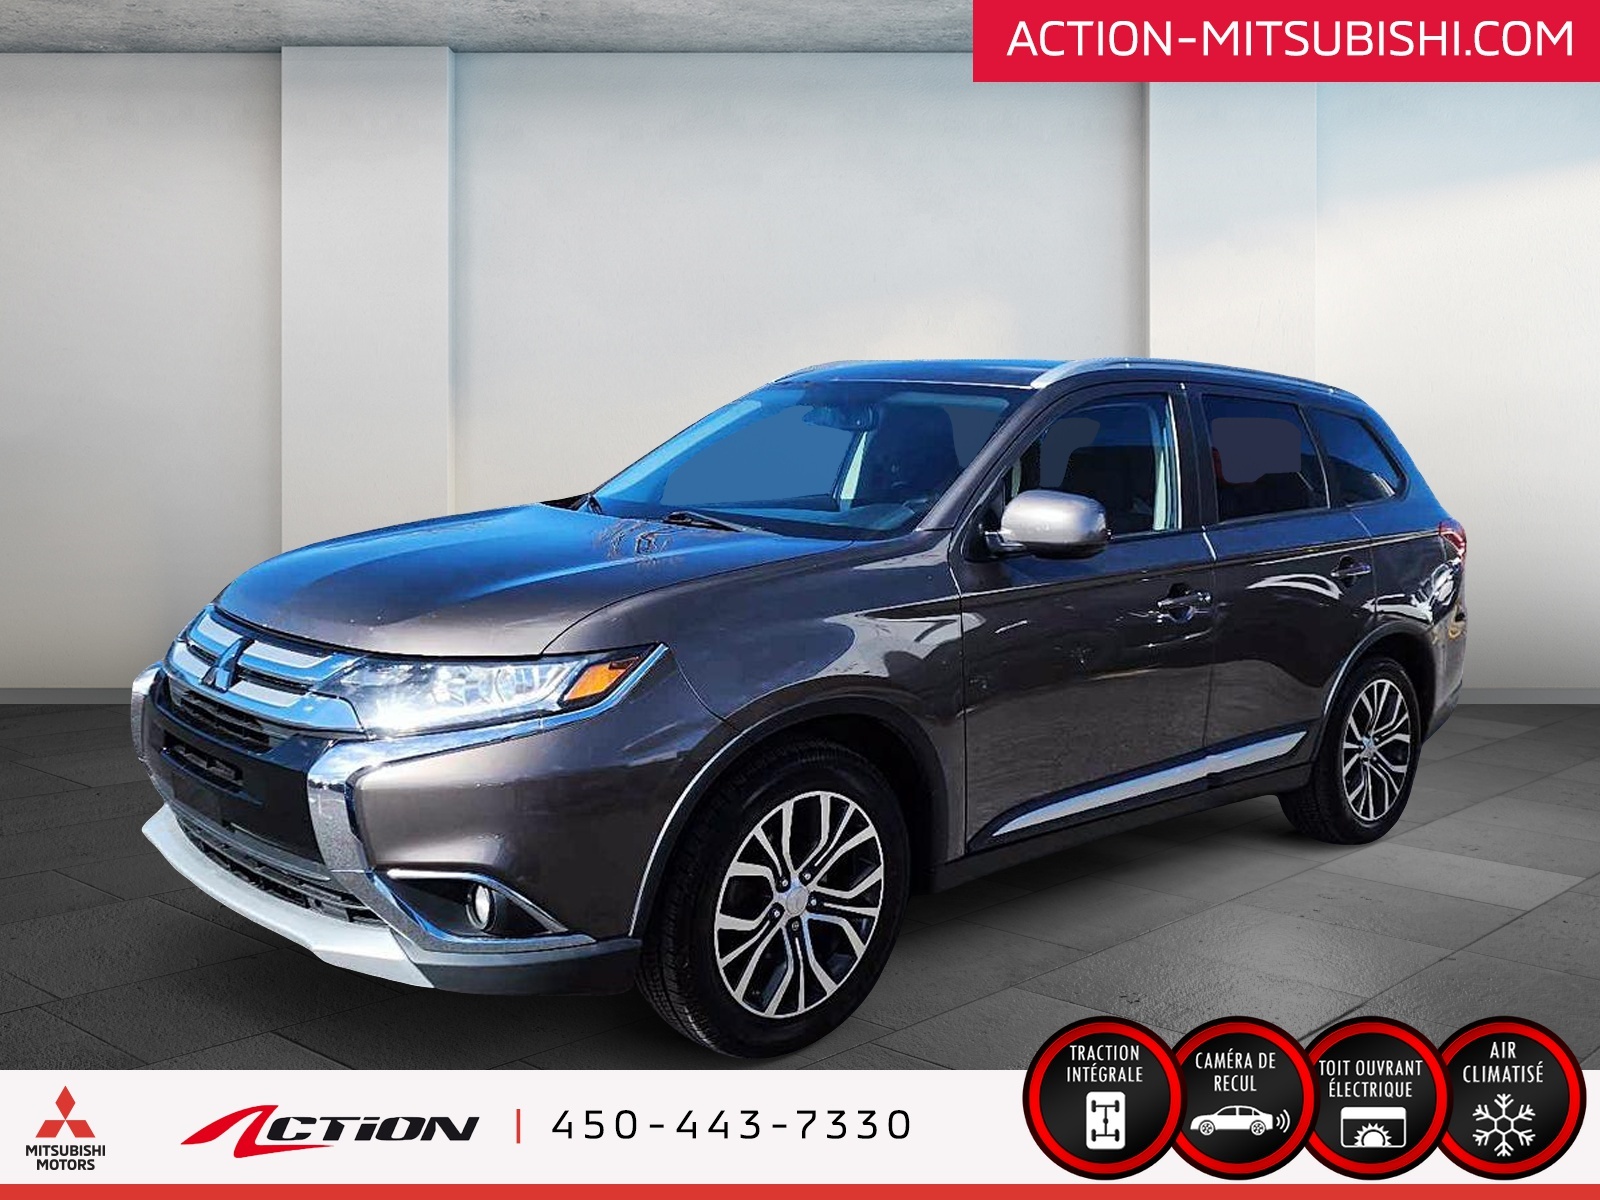 2016 Mitsubishi Outlander AWC ES TOURING+TOIT OUVRANT+MAGS+CAMÉRA+BLUETOOTH